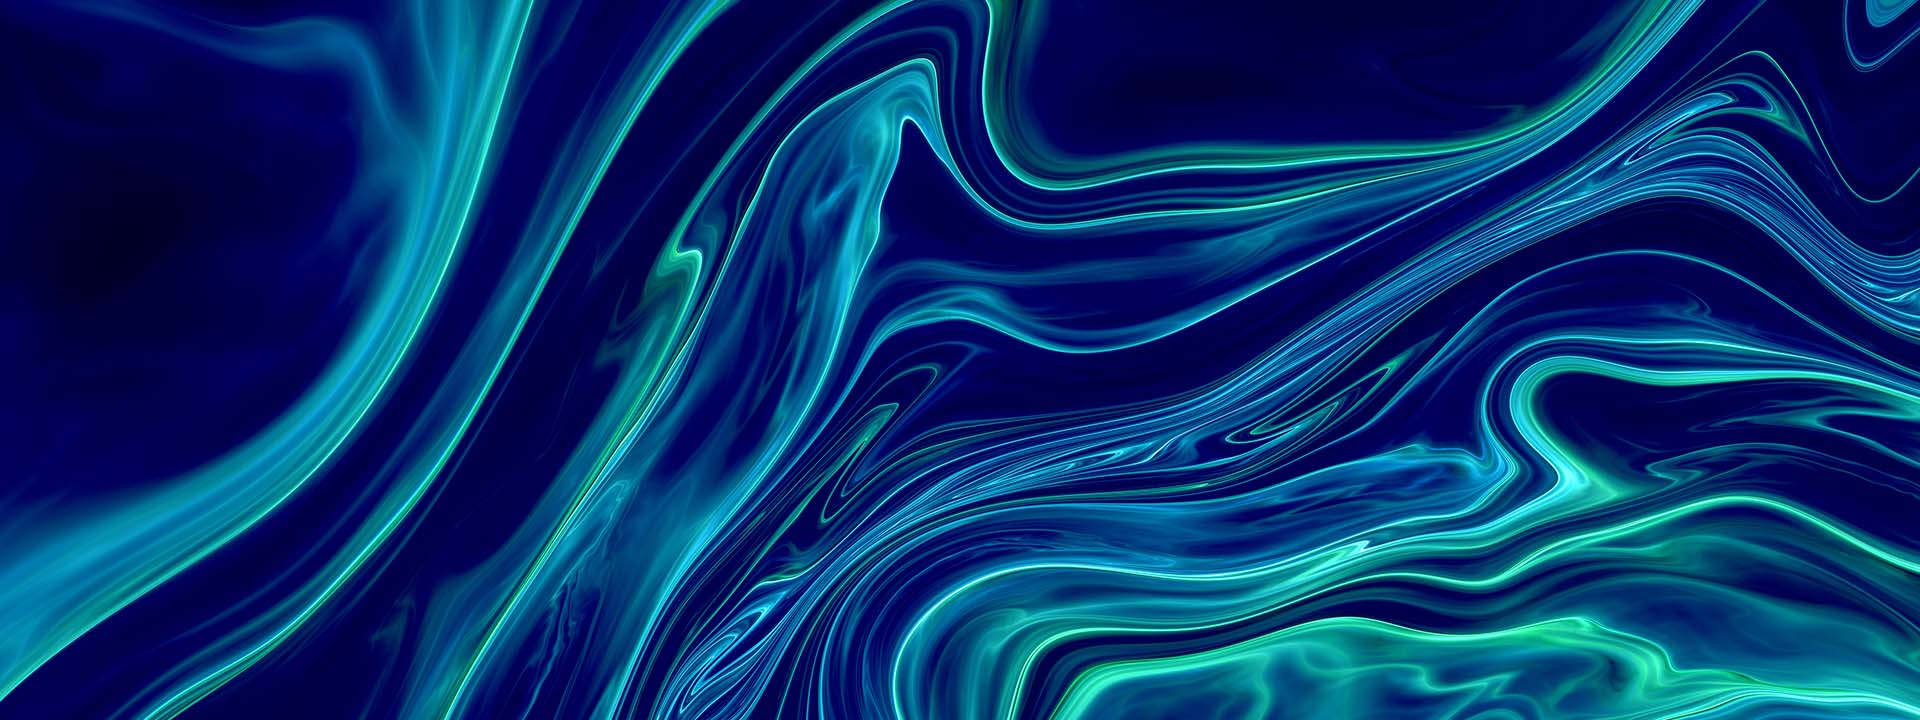 abstract fractal blue background pattern